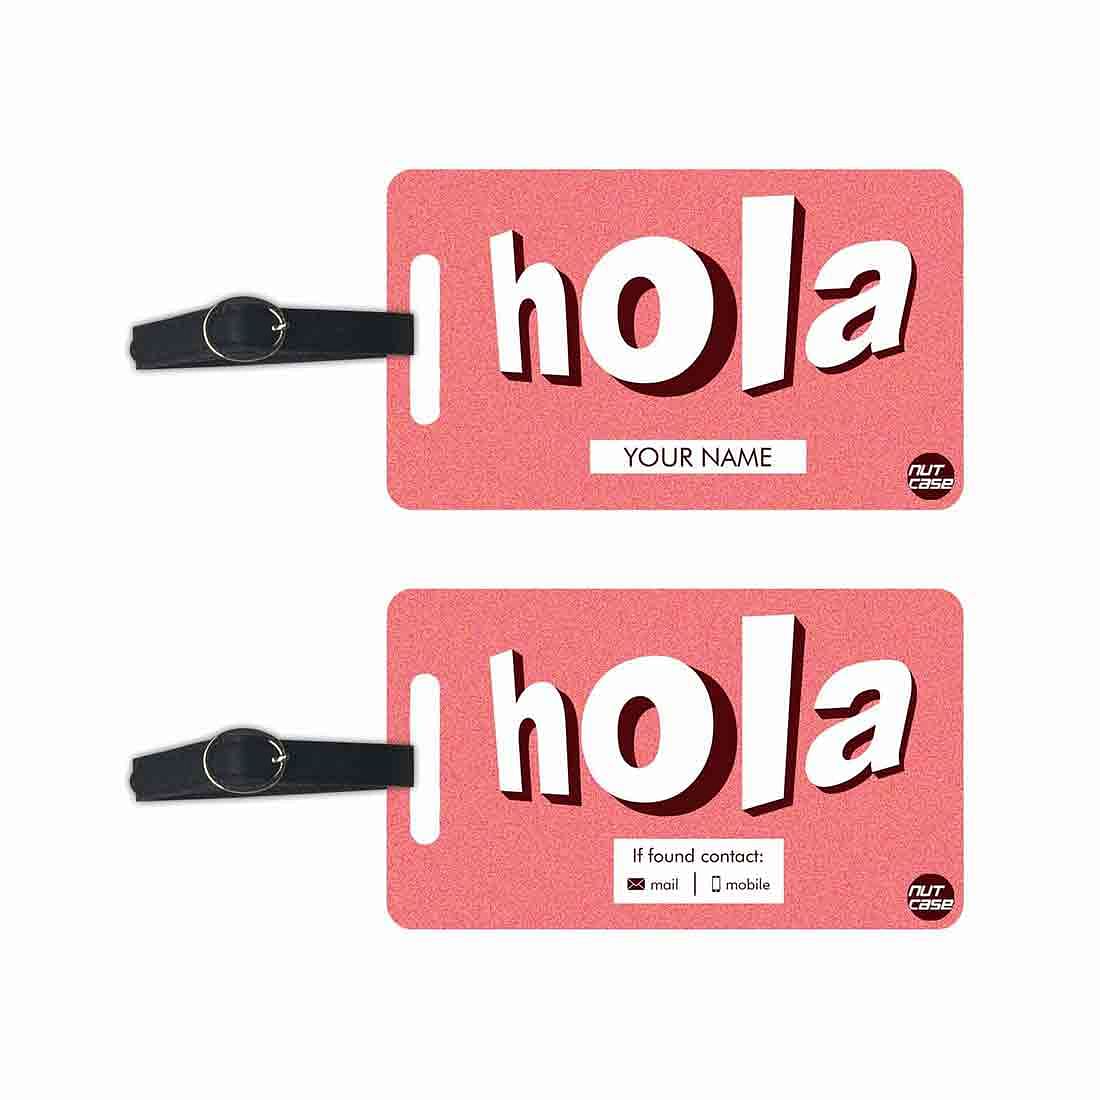 Best Custom-Made Luggage Tags - Add your Name - Set of 2 Nutcase